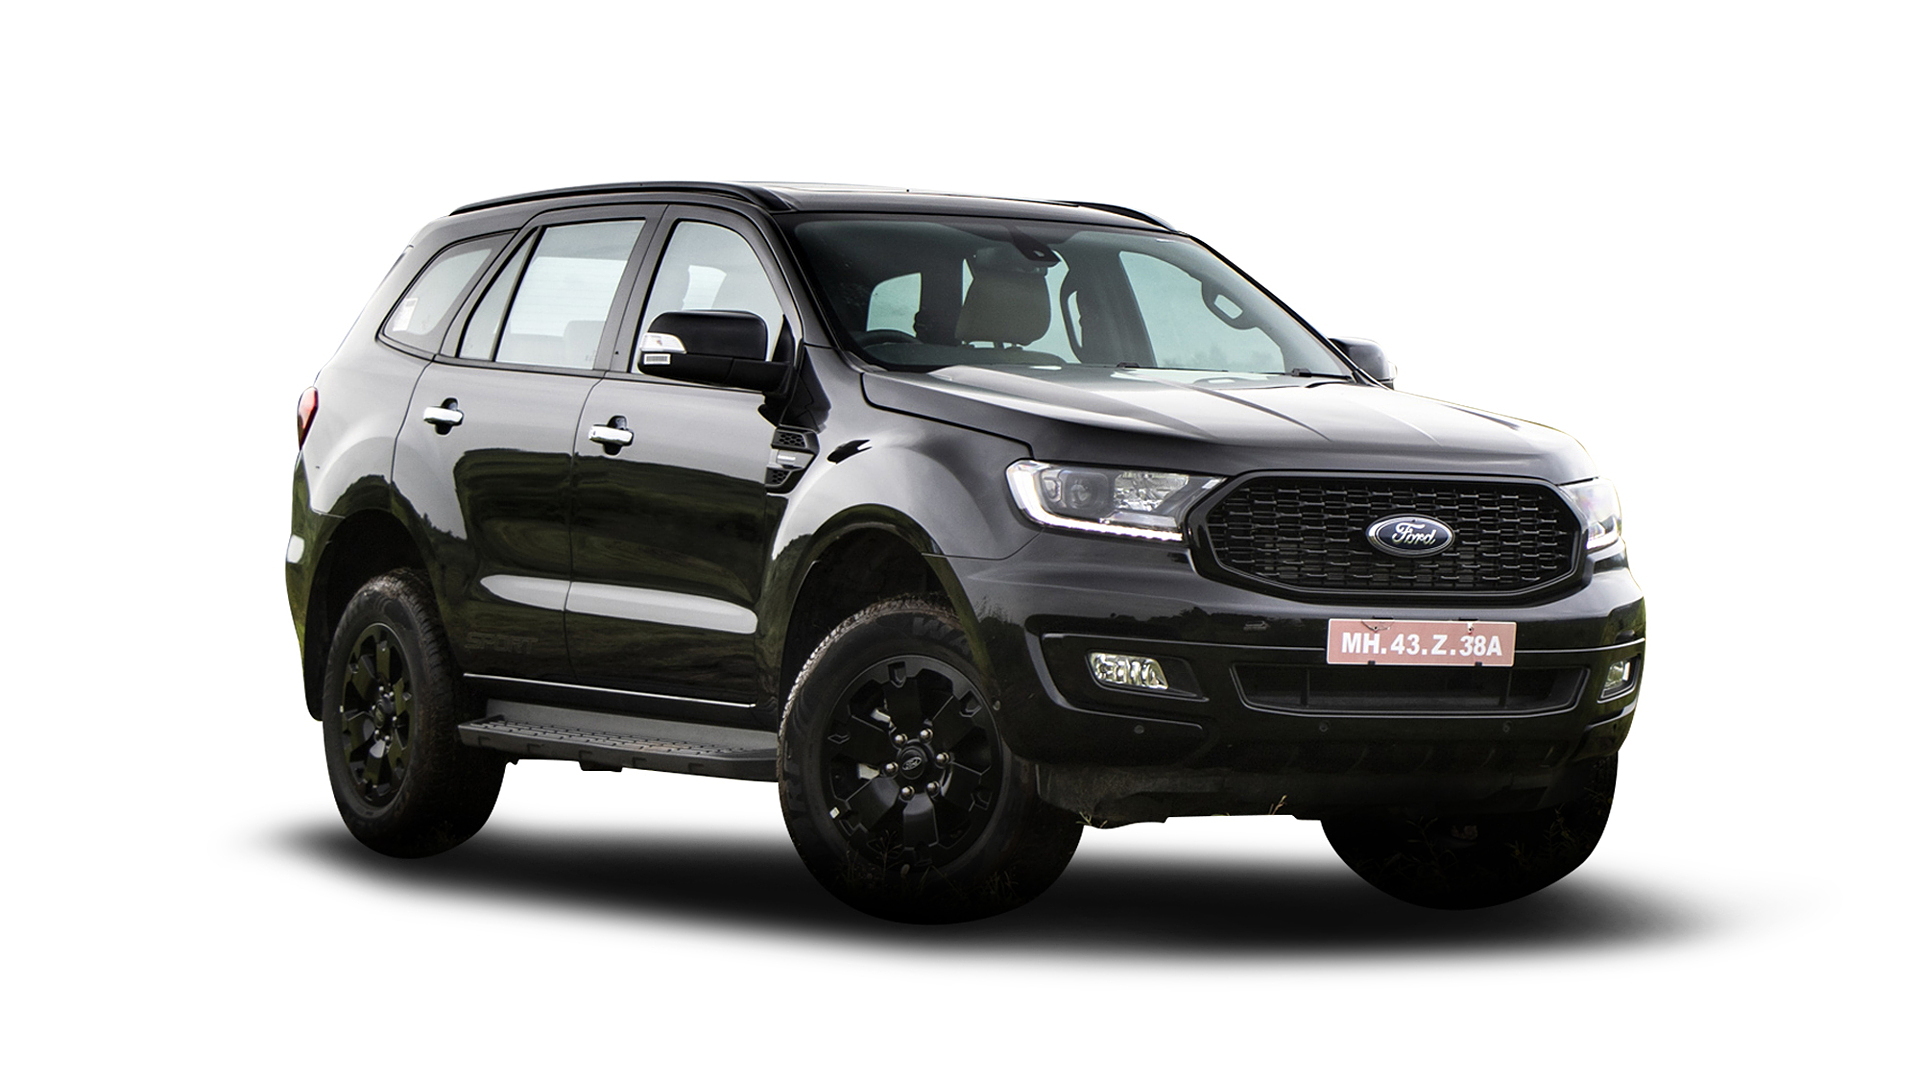 Ford Endeavour Images - Interior & Exterior Photo Gallery [300+ Images] -  CarWale